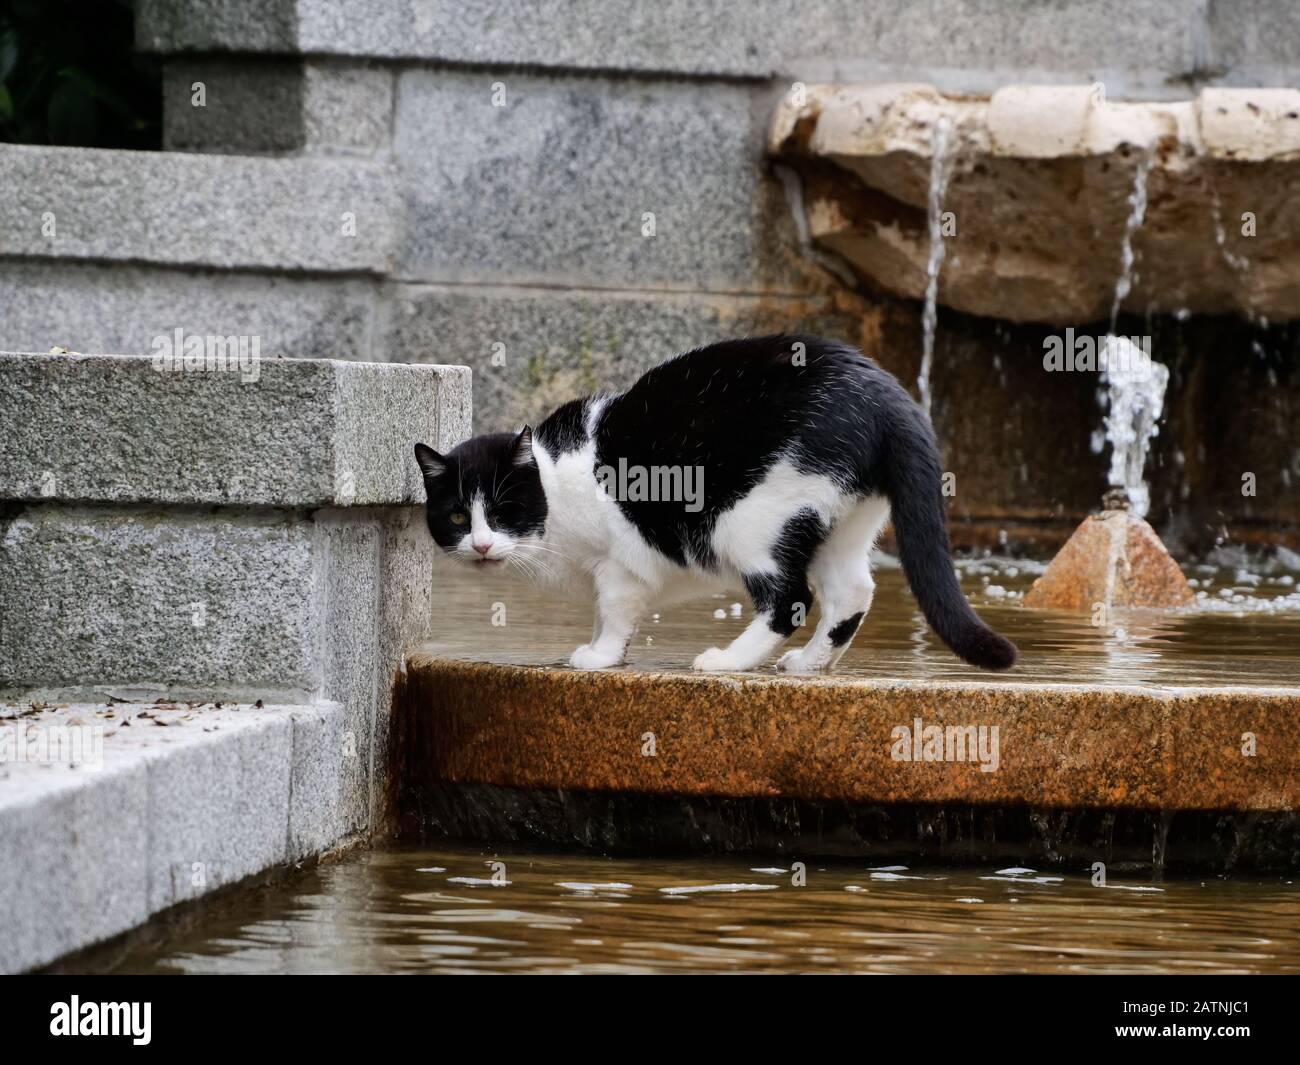 one-eyed cat black and white drinking water in a park fountain Stock Photo